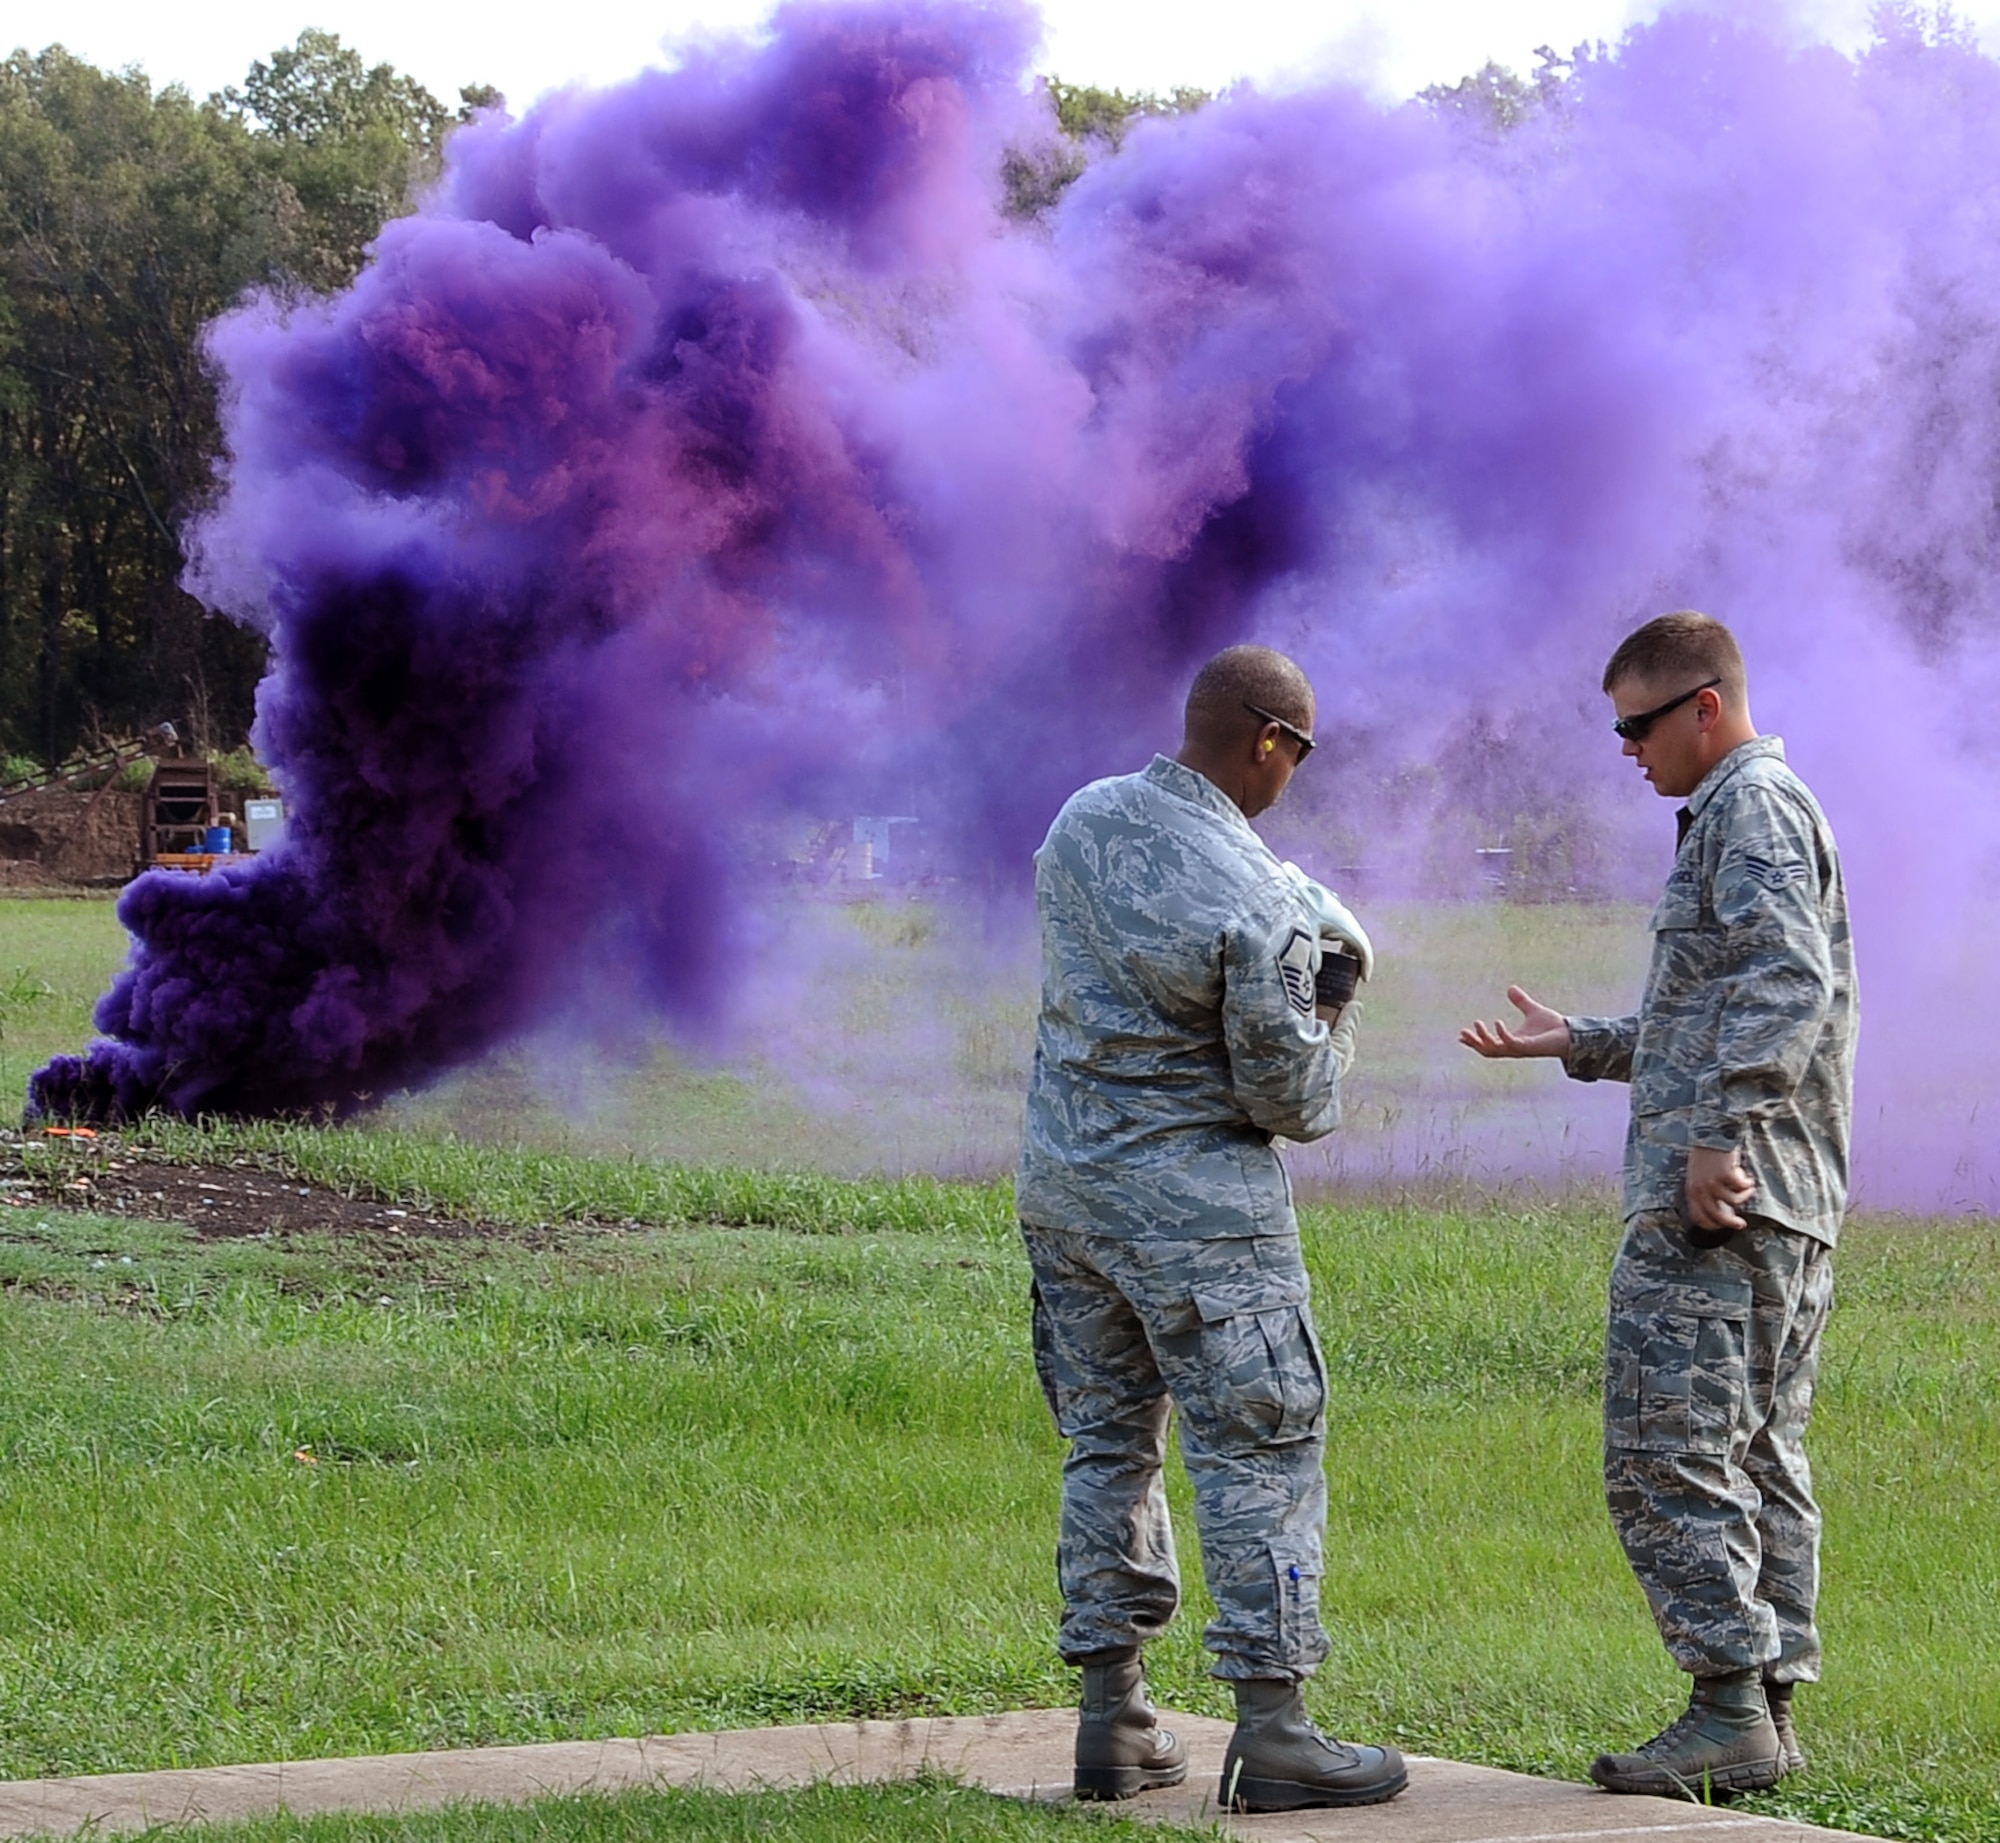 Senior Airman Timothy Habedank (right), 2nd Civil Engineer Squadron Explosive Ordnance Disposal technician, shows Master Sgt. Kevin Chambliss, 2nd Communications Squadron, how to properly hold an M-18 smoke grenade prior to throwing it at the EOD facility on Barksdale Air Force Base, La., Sept. 18. Habedank taught 11 Barksdale personnel how to use smoke grenades and ground burst simulators. (U.S. Air Force photo/Staff Sgt. Amber Ashcraft)(RELEASED)